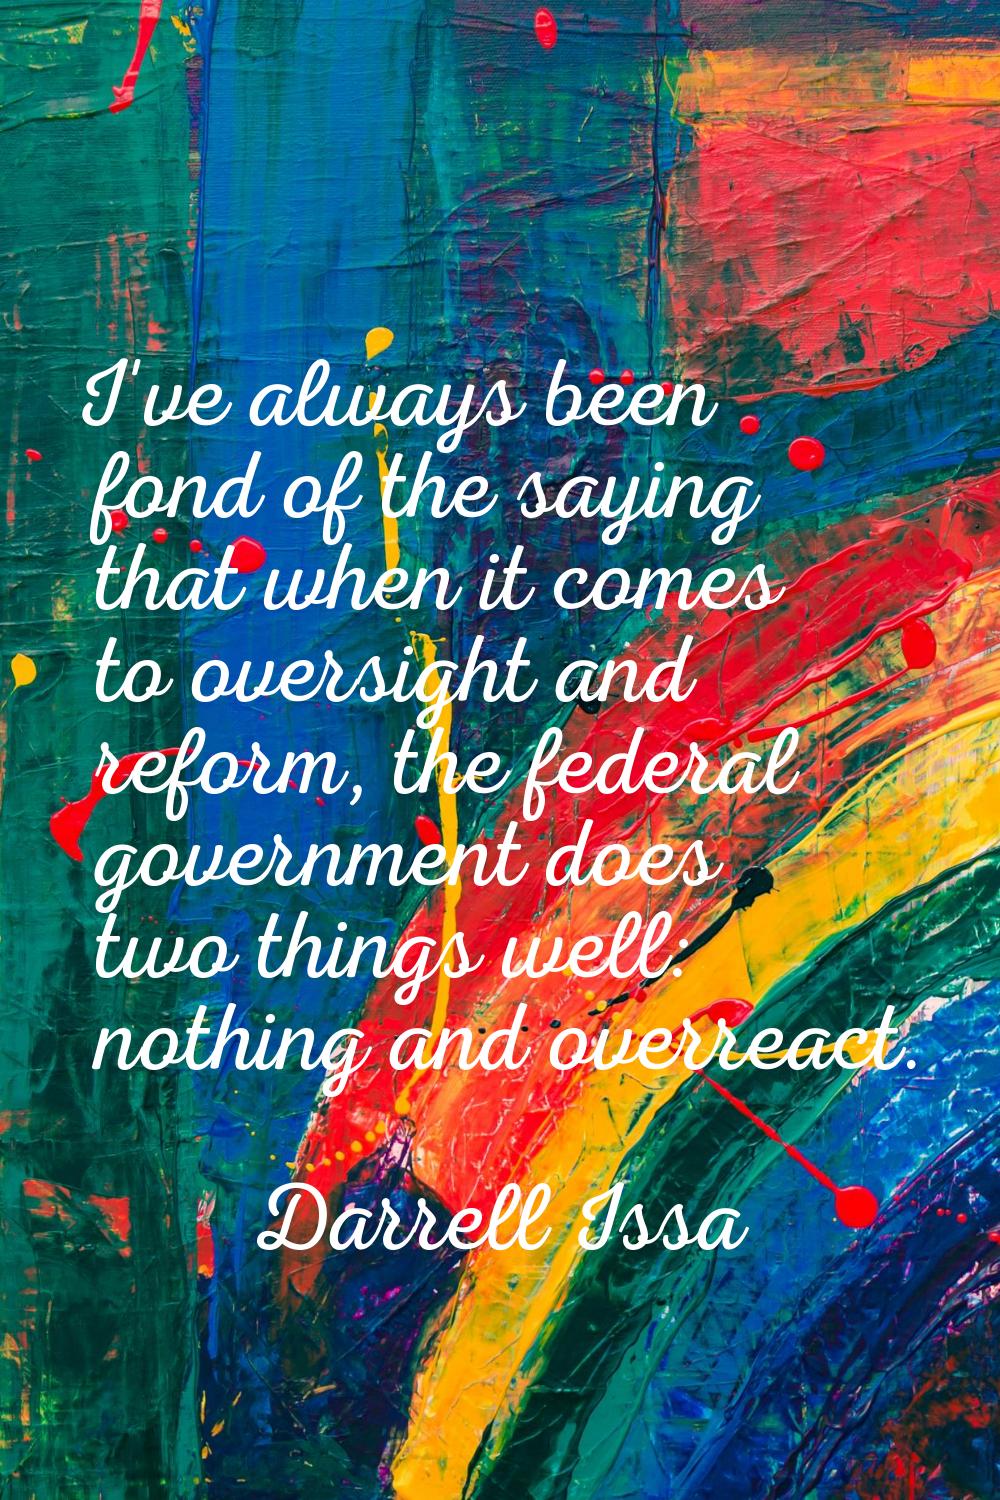 I've always been fond of the saying that when it comes to oversight and reform, the federal governm